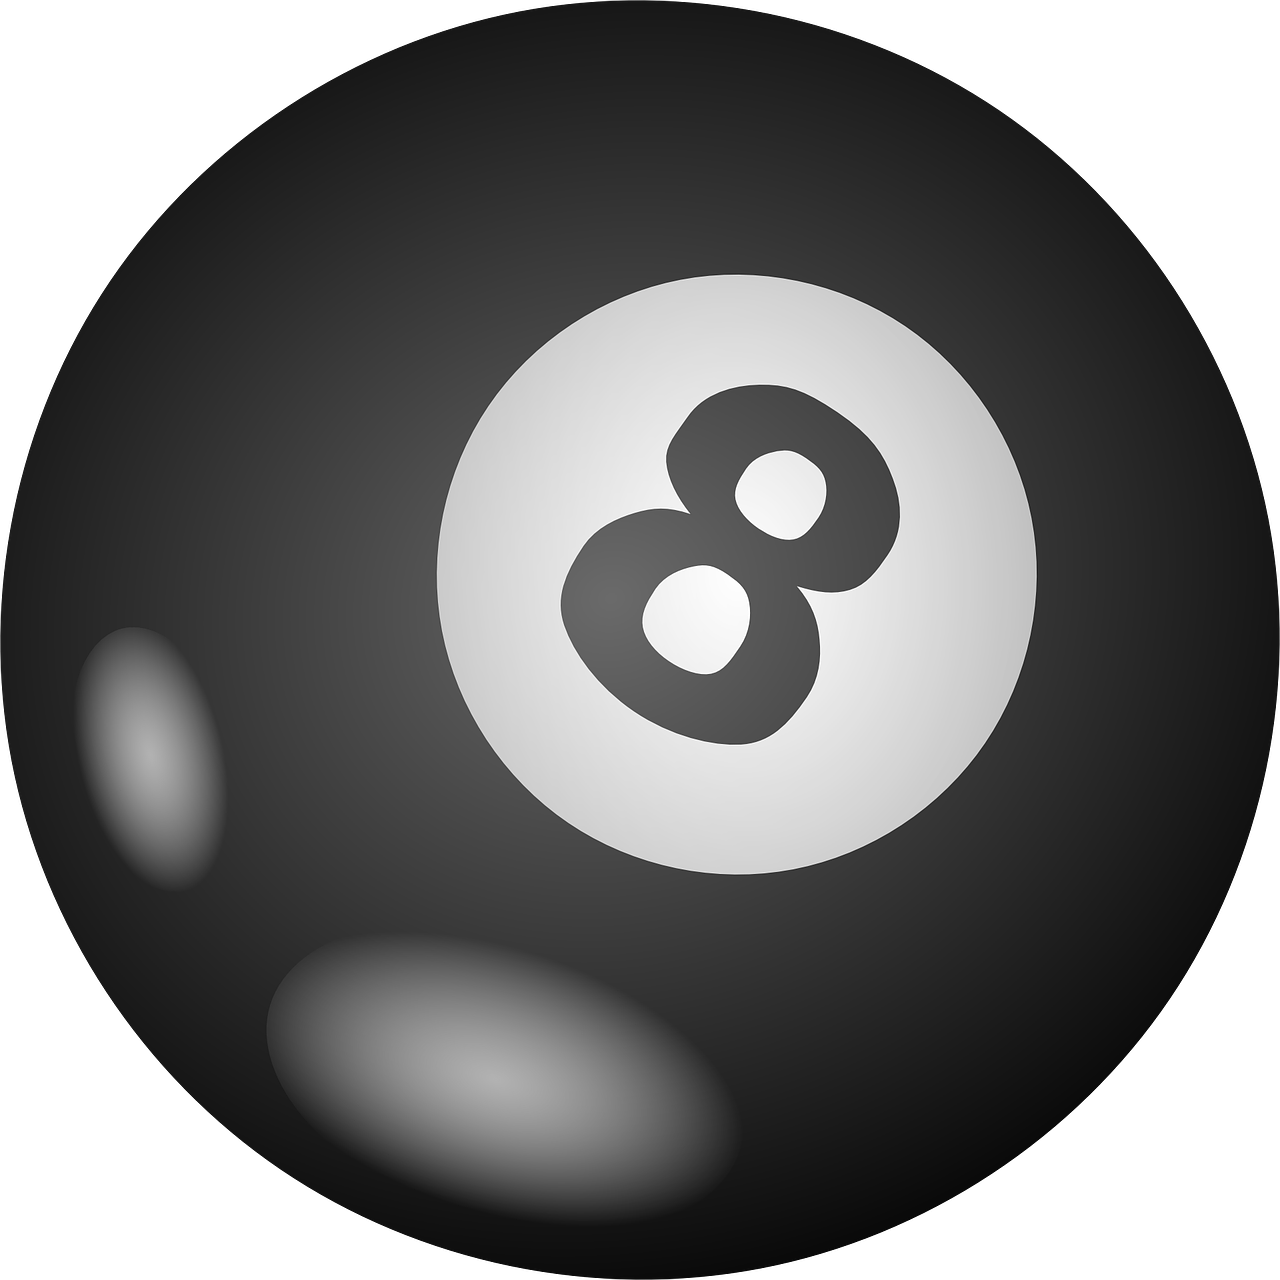 ball,billiards,sphere,eight,number 8,pool,snooker,free vector graphics,free pictures, free photos, free images, royalty free, free illustrations, public domain